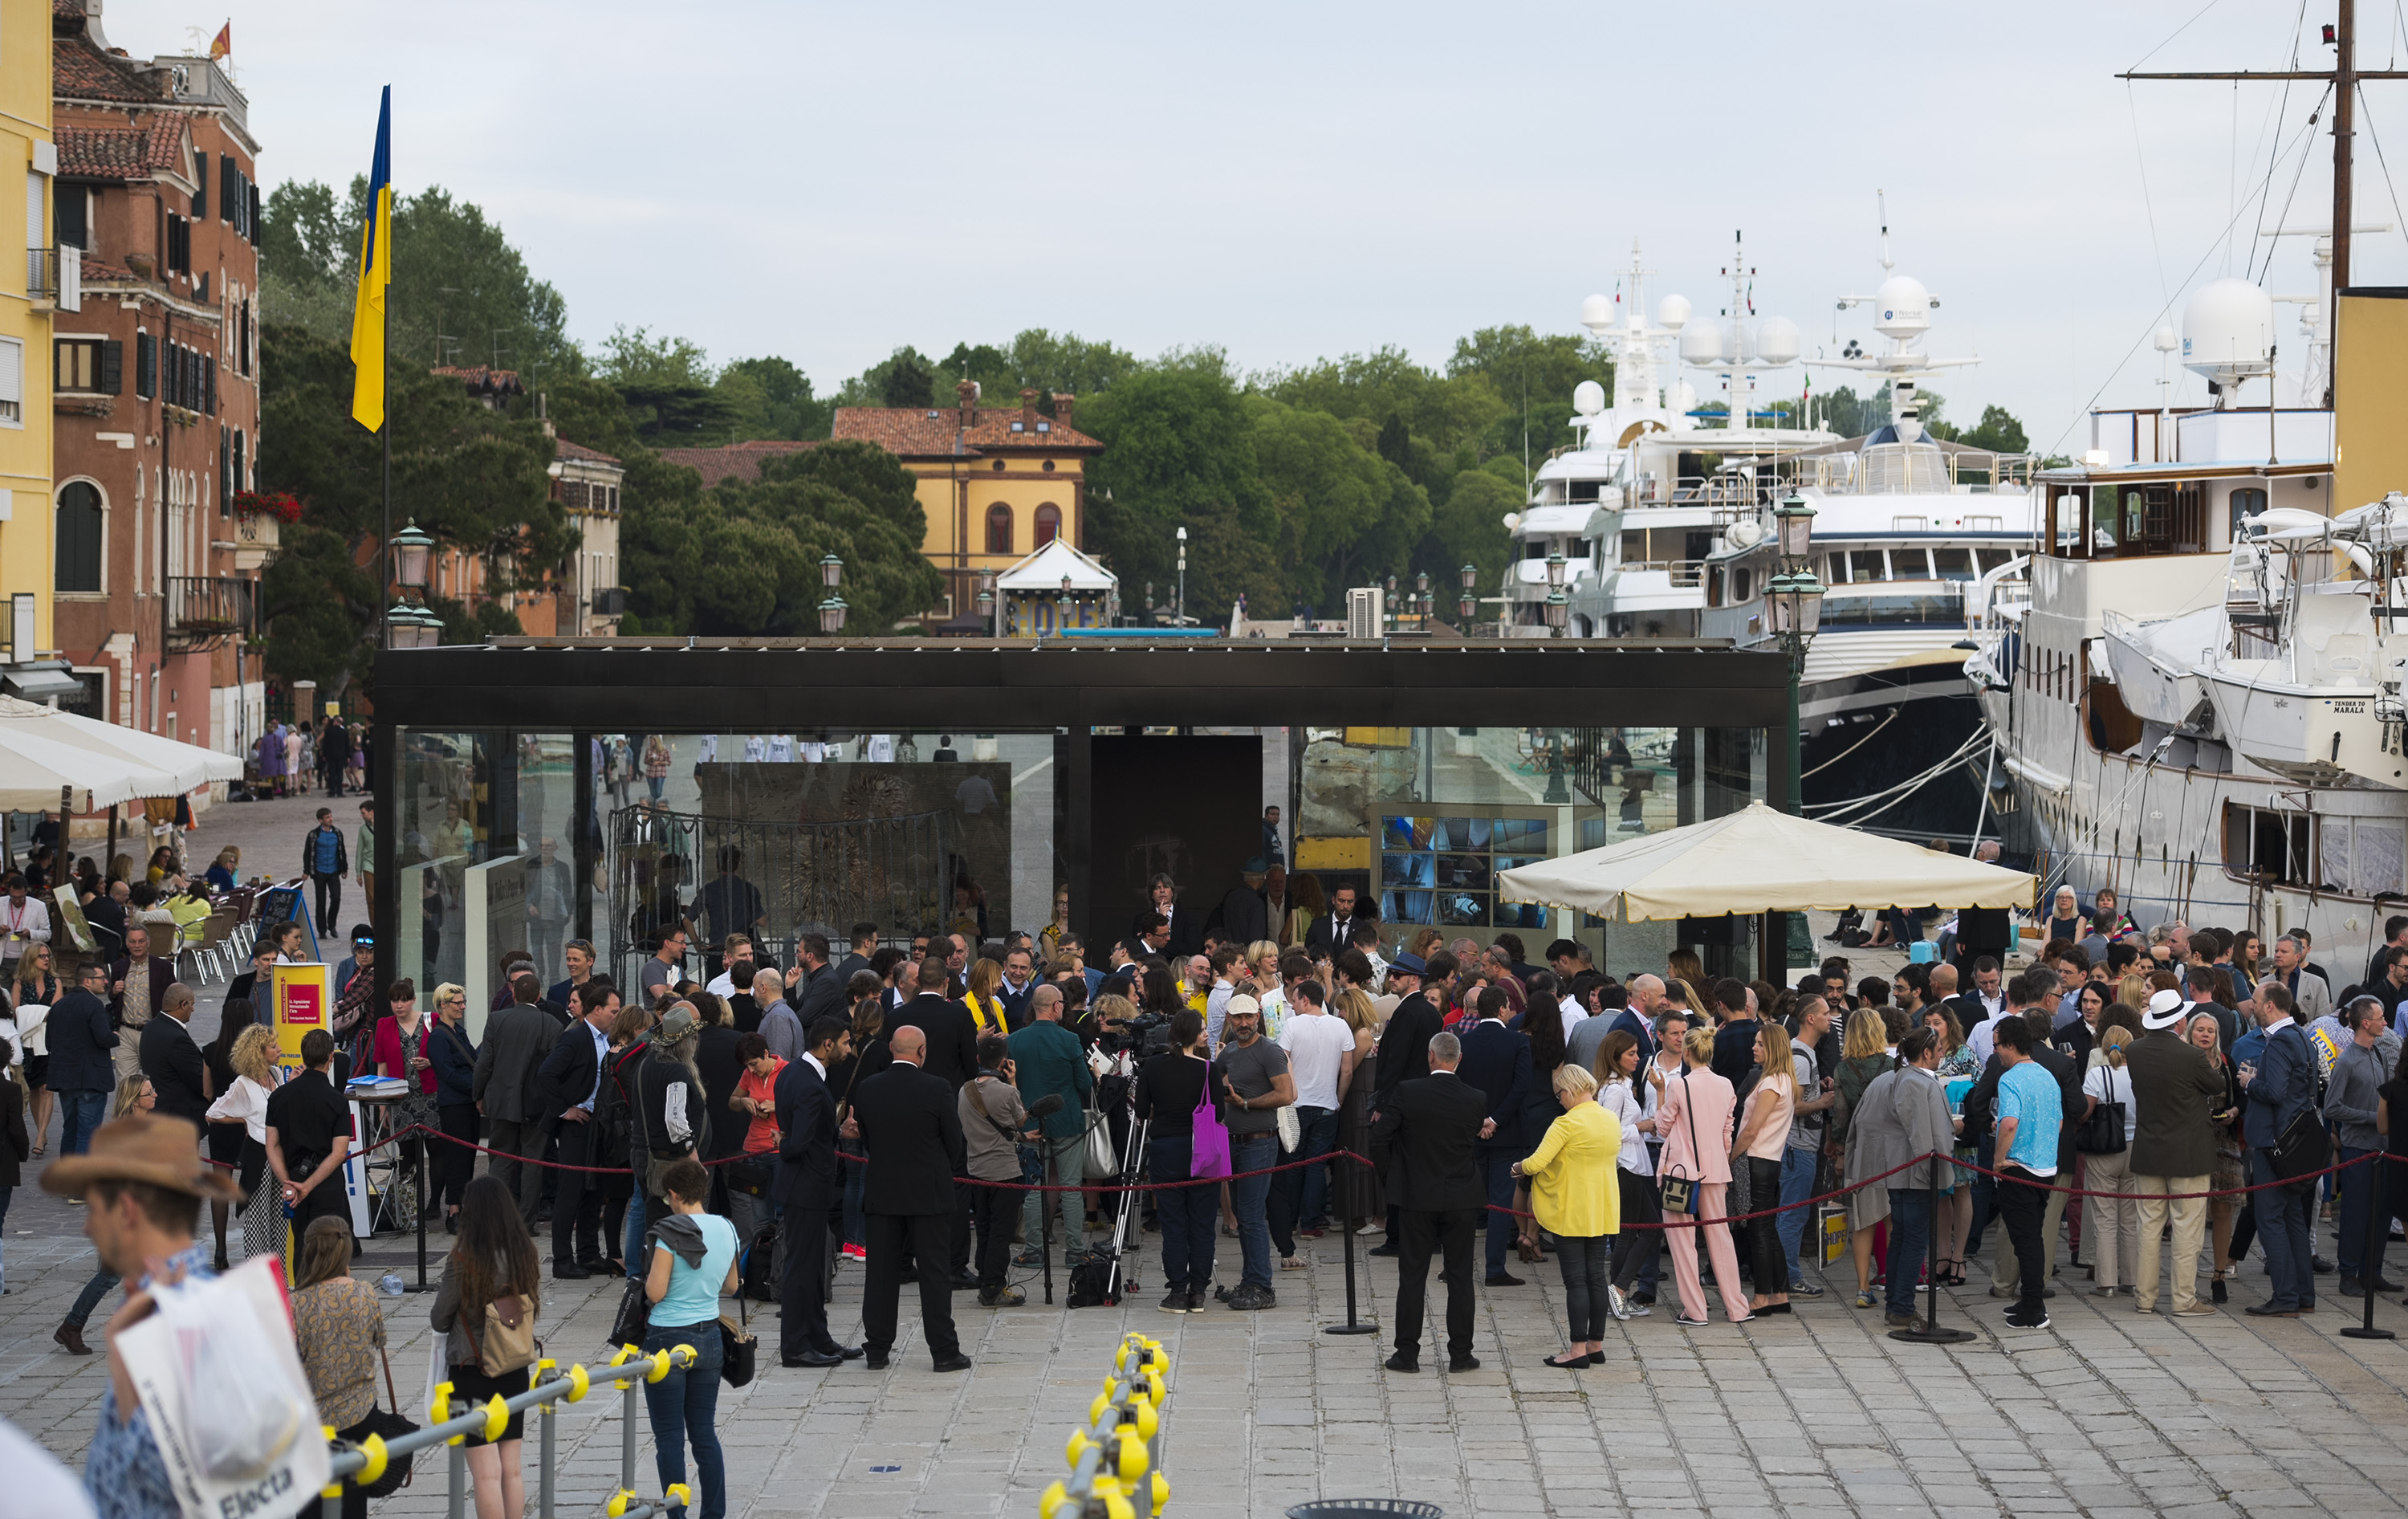 Official opening of “Hope!”, the Pavilion of Ukraine at the 56th International Art Exhibition – la Biennale di Venezia, and “Okean Elzy” concert